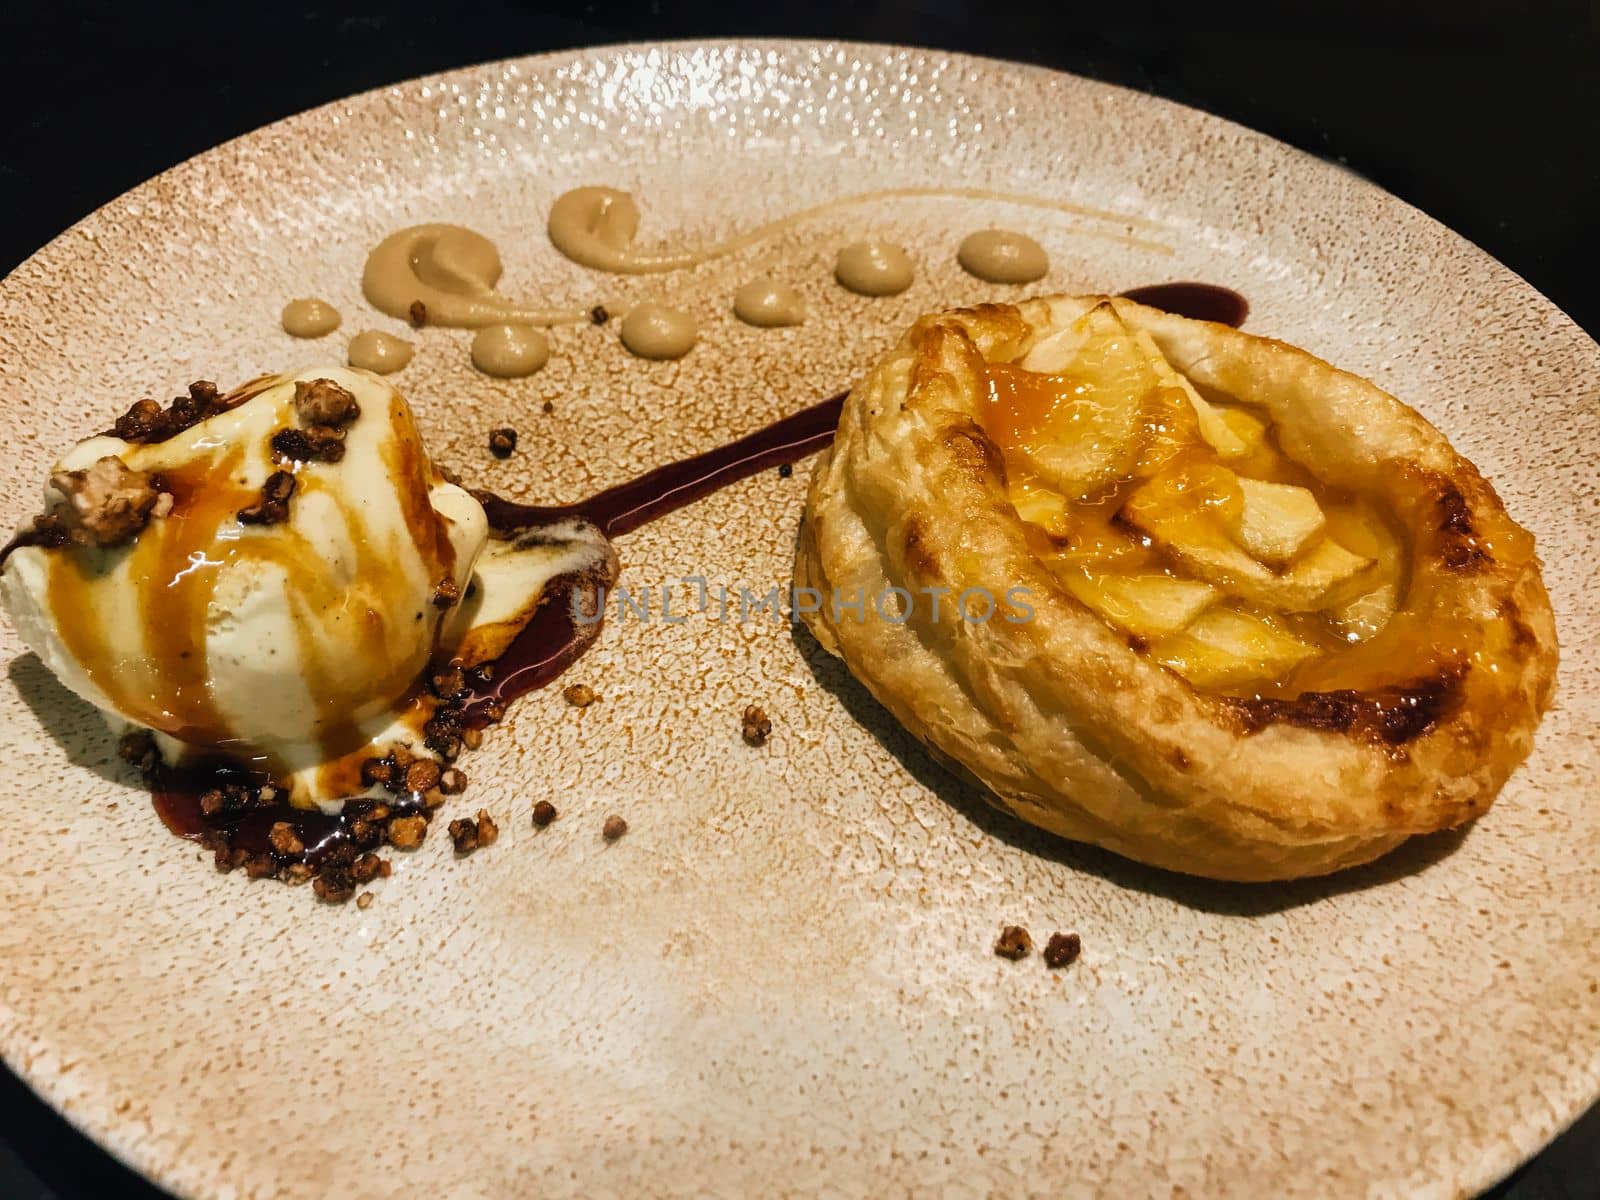 Small Apple pie with caramelised ice ball served in restaurant.